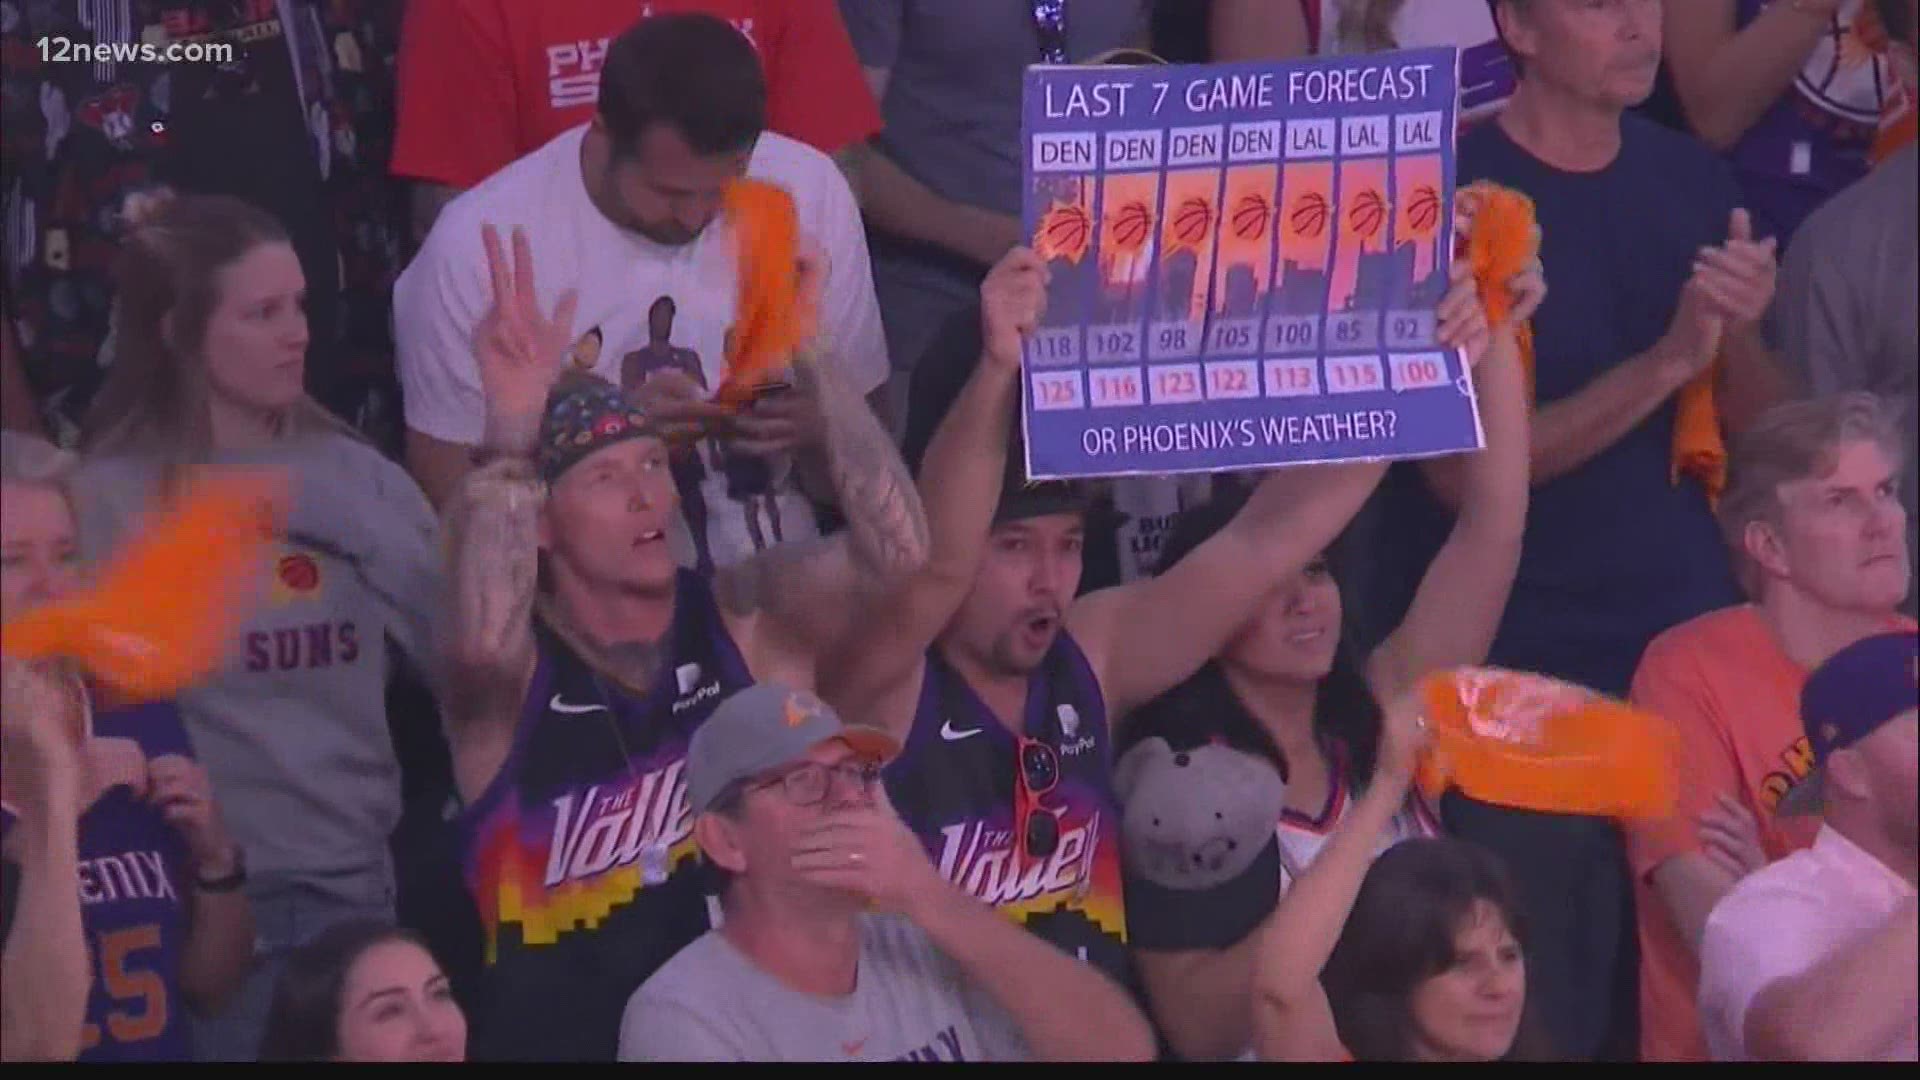 One Suns super fan has set up a road trip for other fans including hotel accommodations and pregame parties for the Western Conference Game 4.